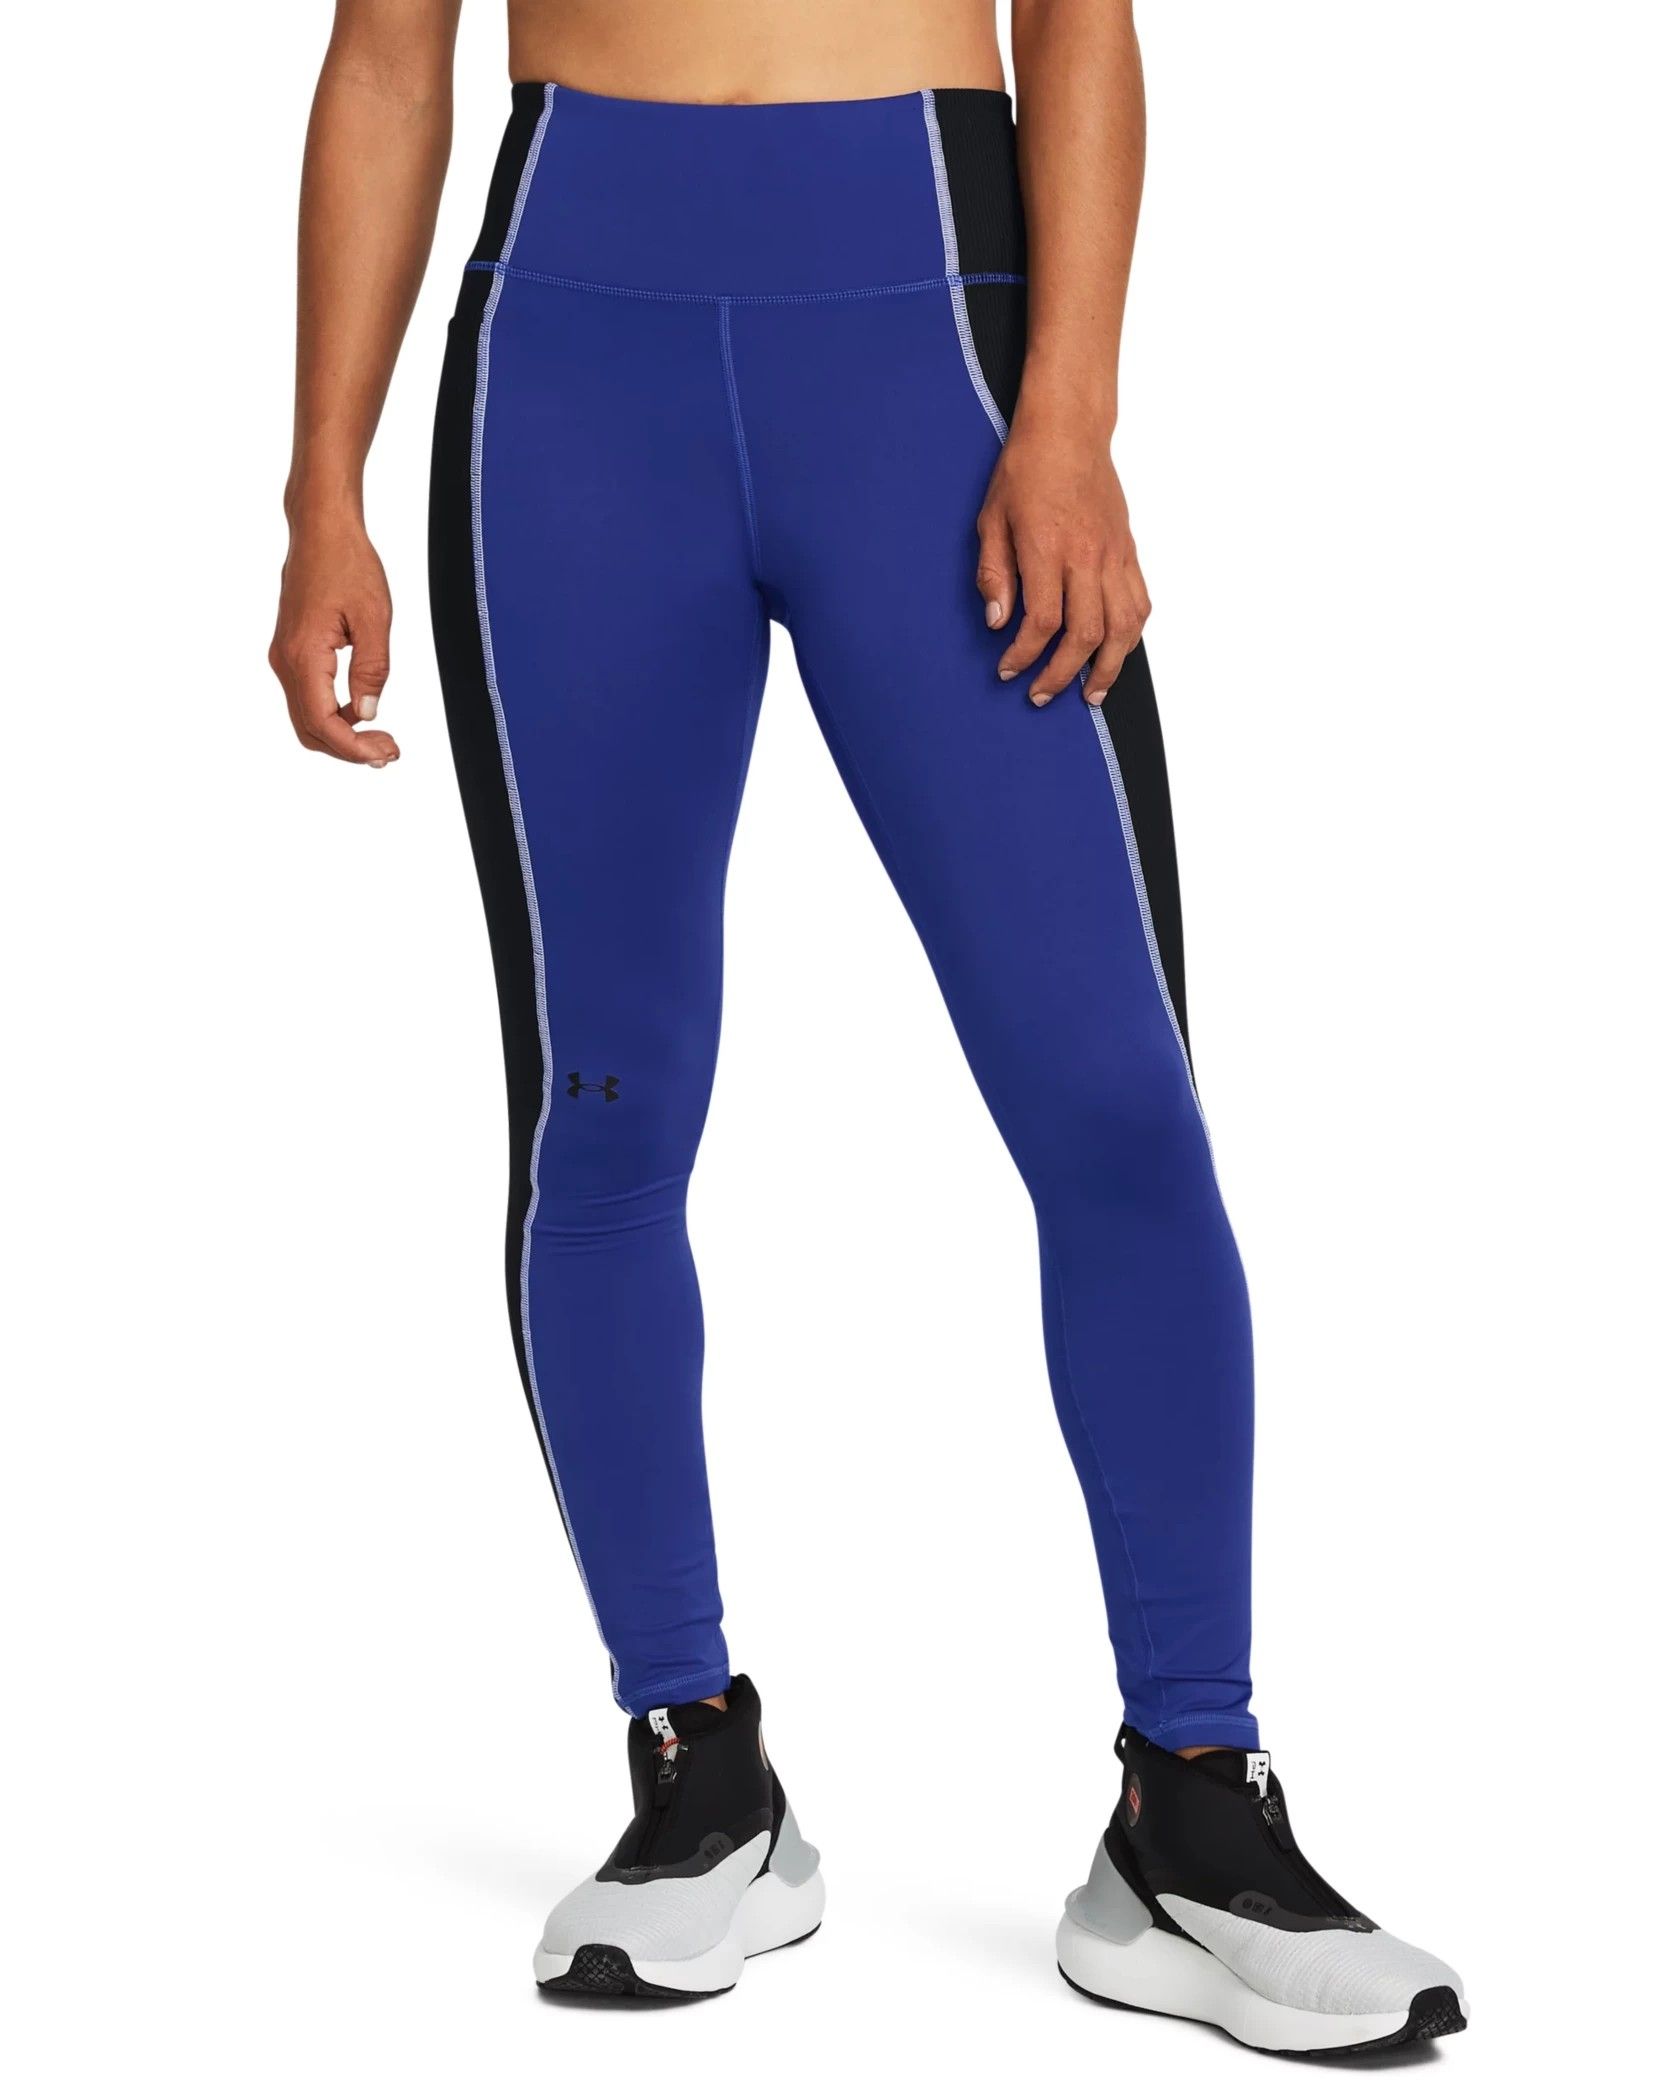 Women's Compression Tights | Cold Weather | Running – CEP Compression